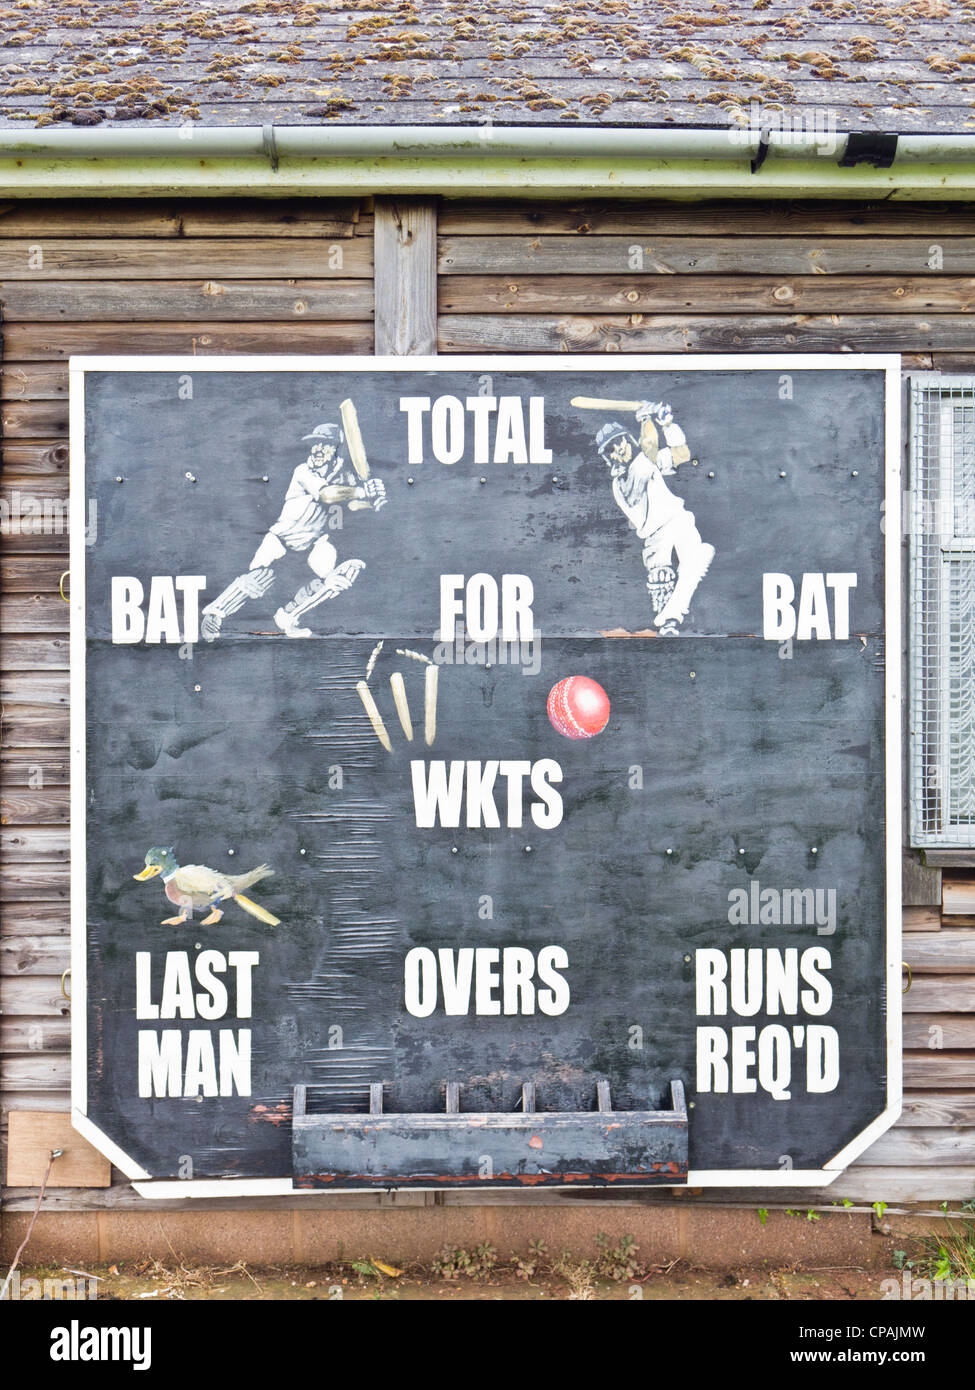 Cricket scoreboard on local clubhouse. Stock Photo